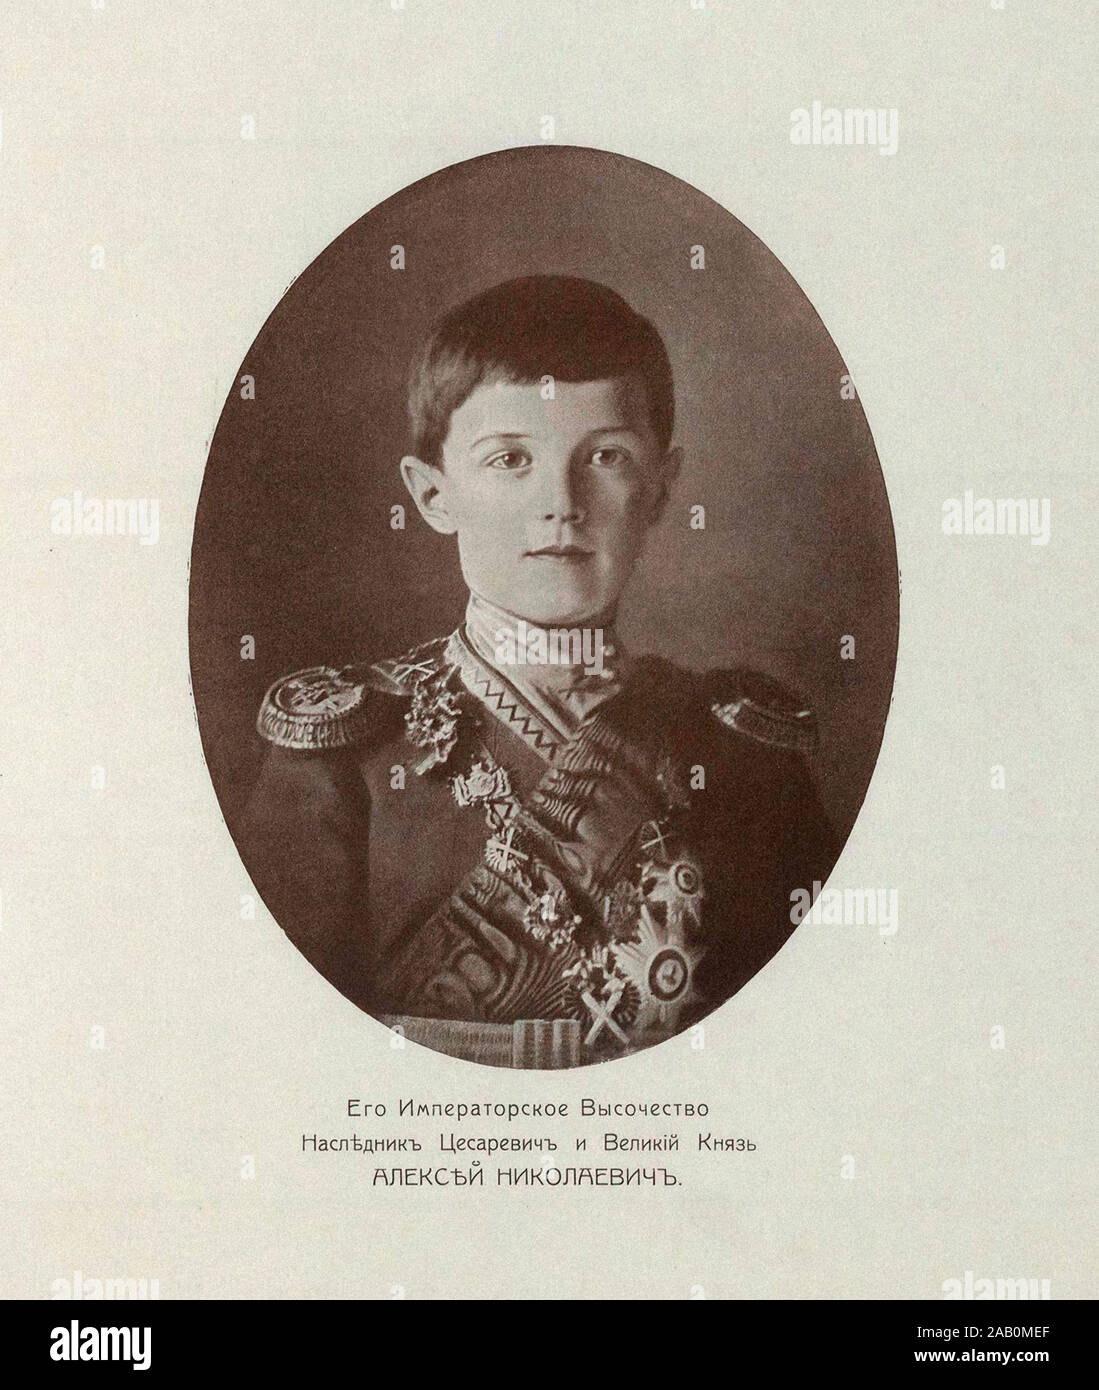 Alexei Nikolaevich  (1904 – 1918) of the House of Romanov, was the last Tsesarevich and heir apparent to the throne of the Russian Empire. He was the Stock Photo